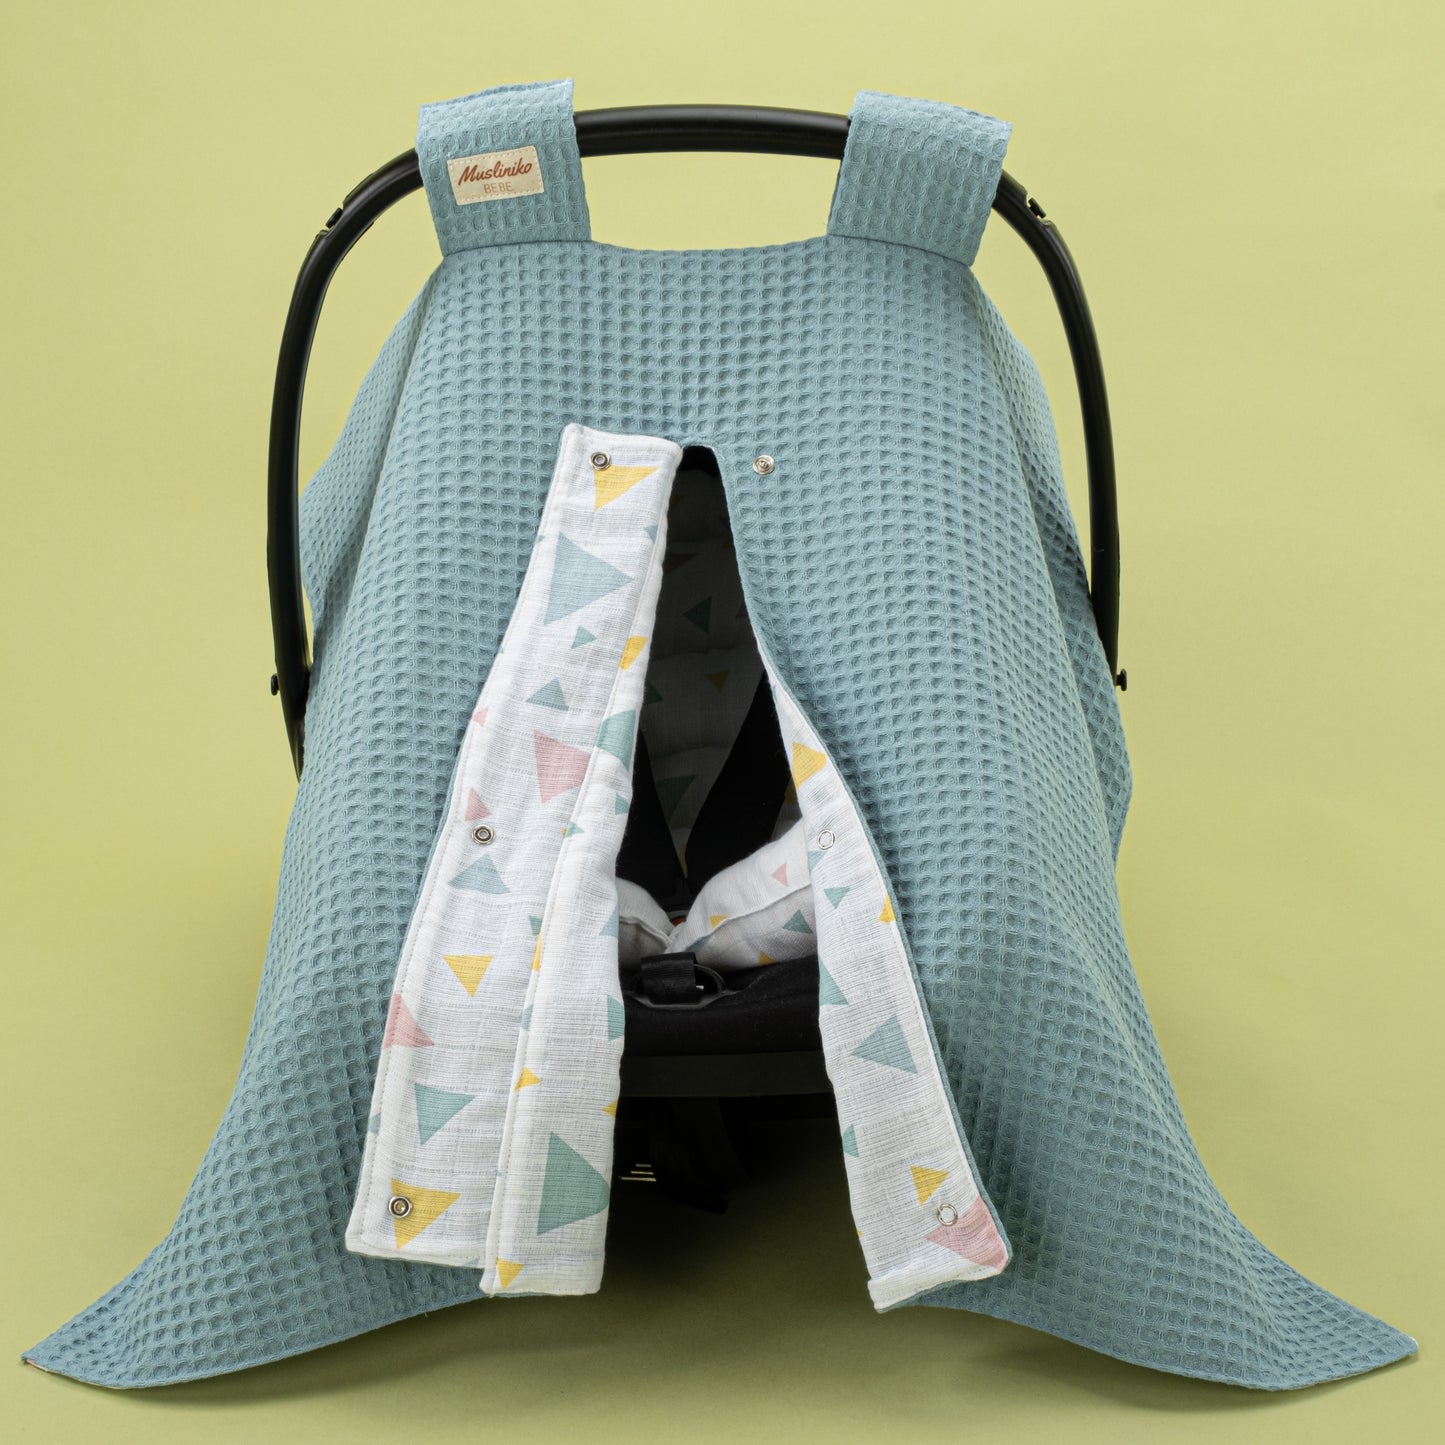 Stroller Cover Set - Double Side - Petrol Blue Honeycomb - Colored Triangles